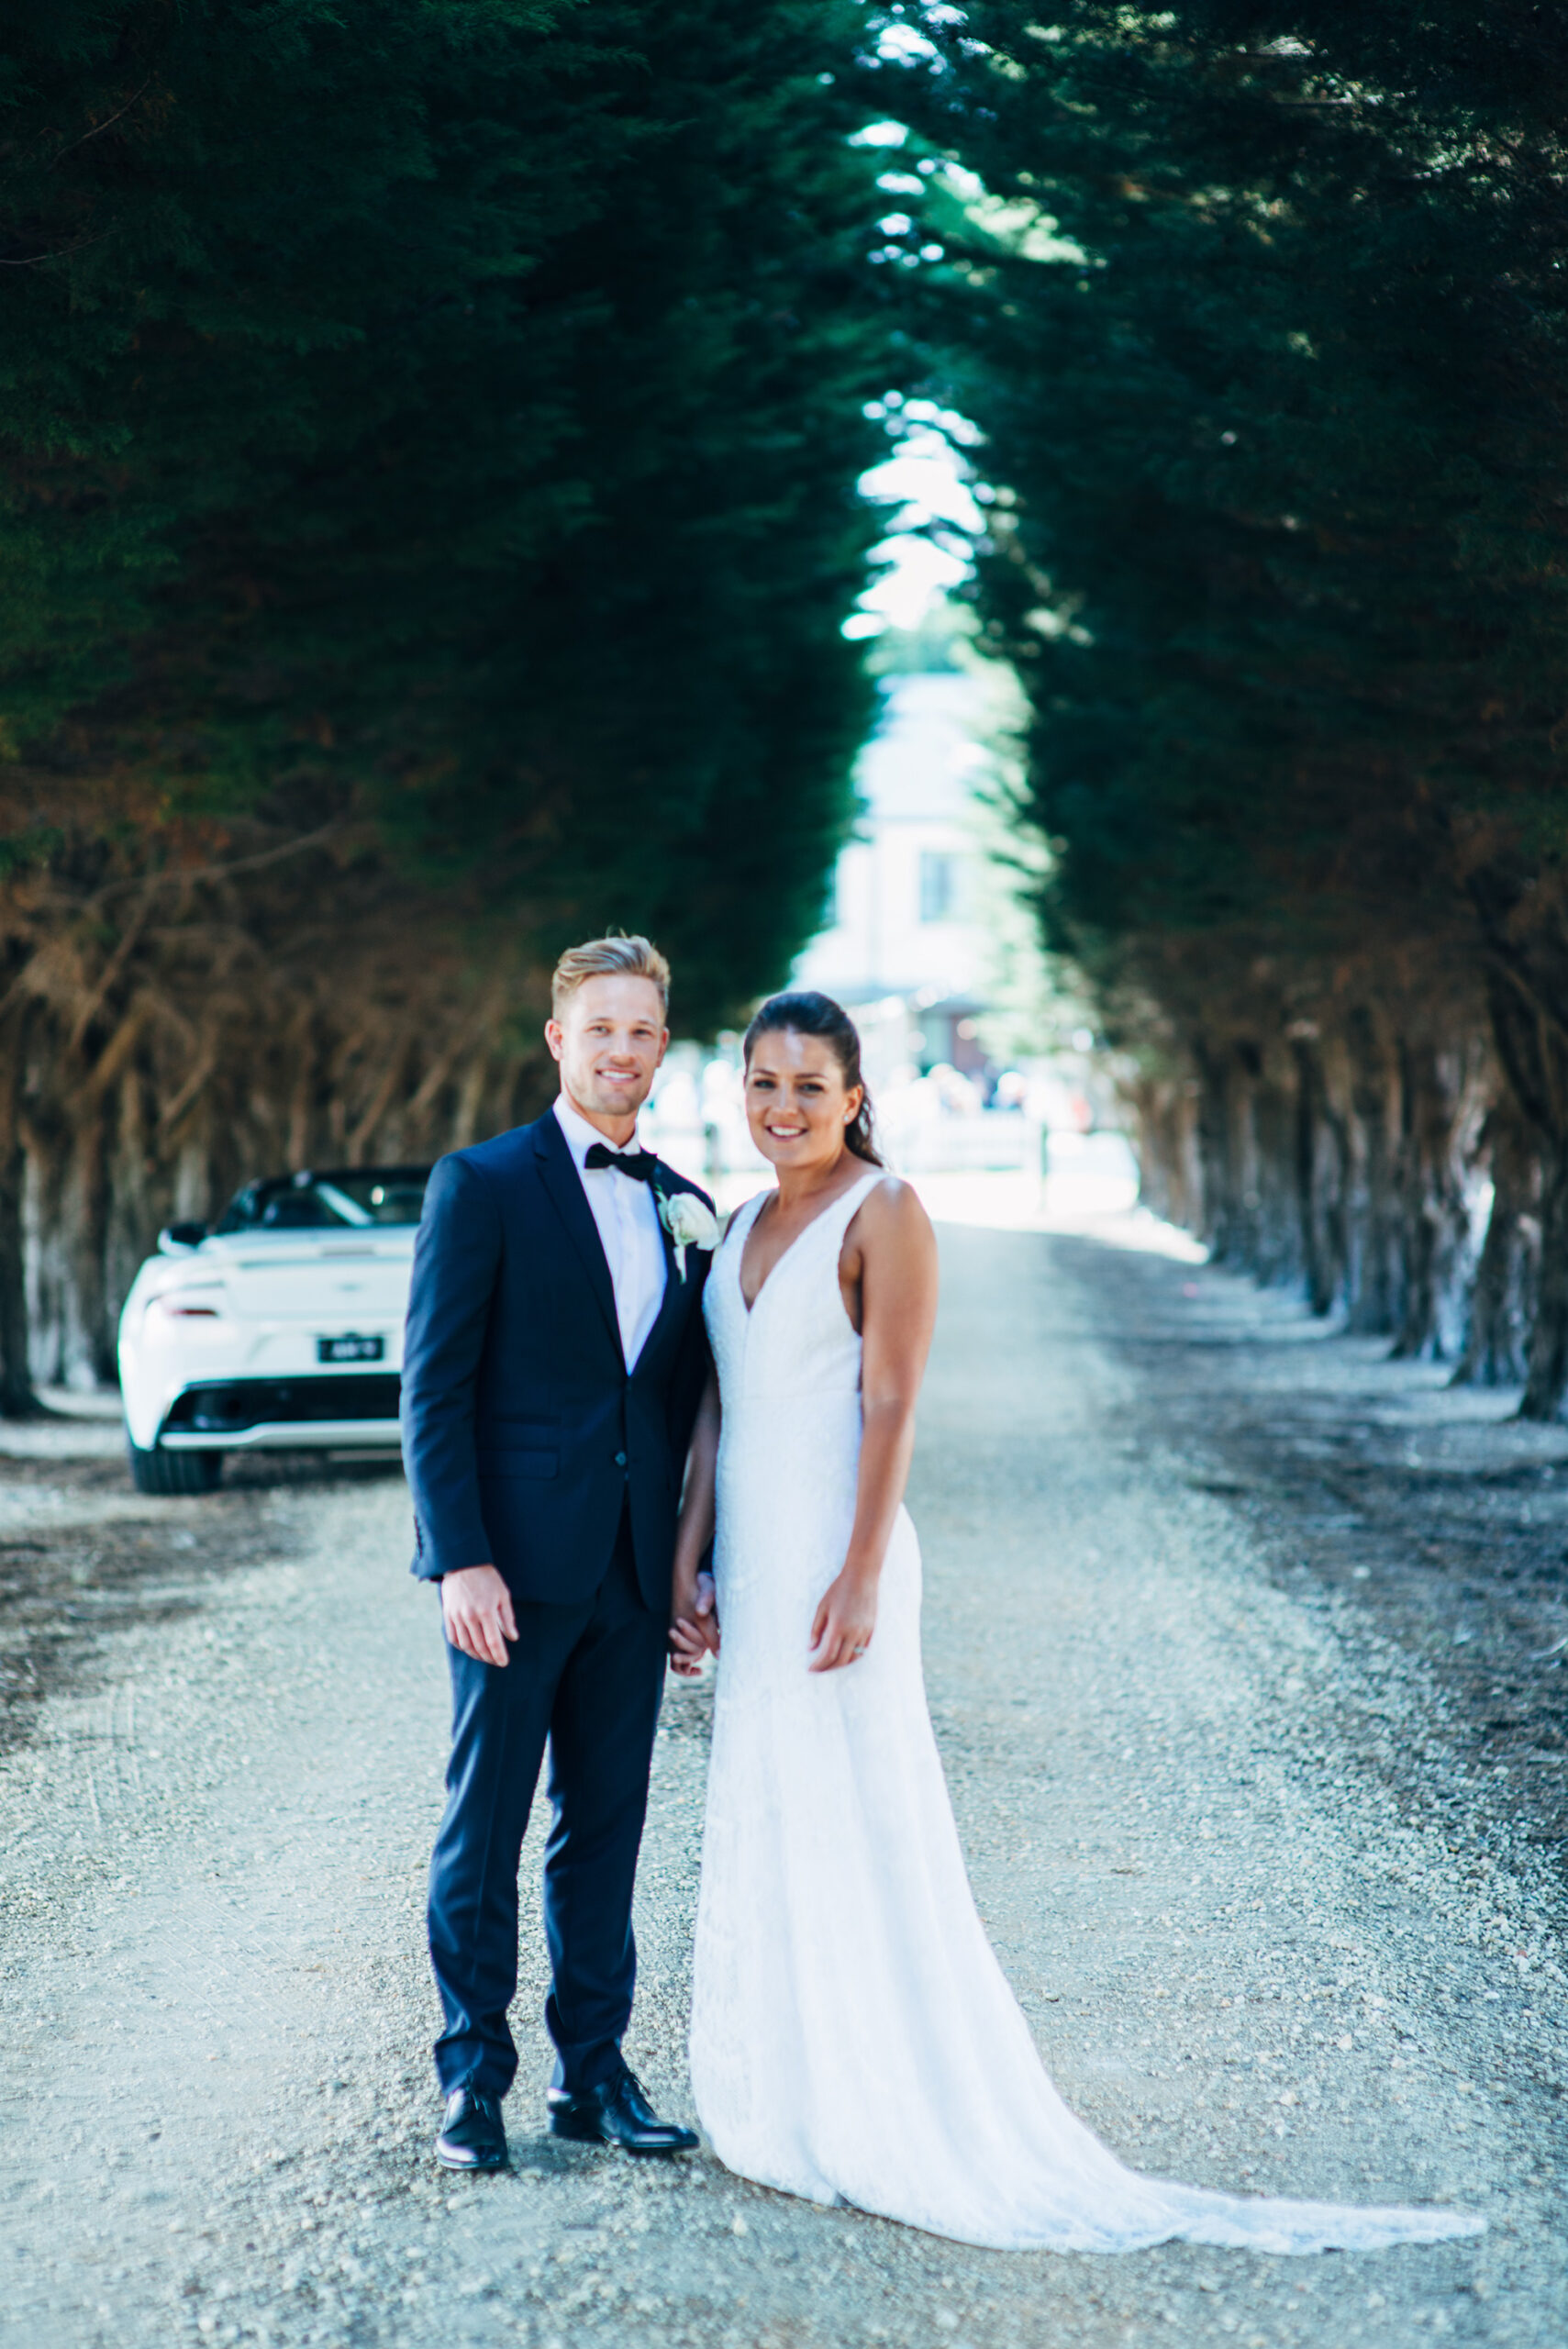 Danielle Seamus Elegant Rustic Wedding Love Other Photography 028 scaled